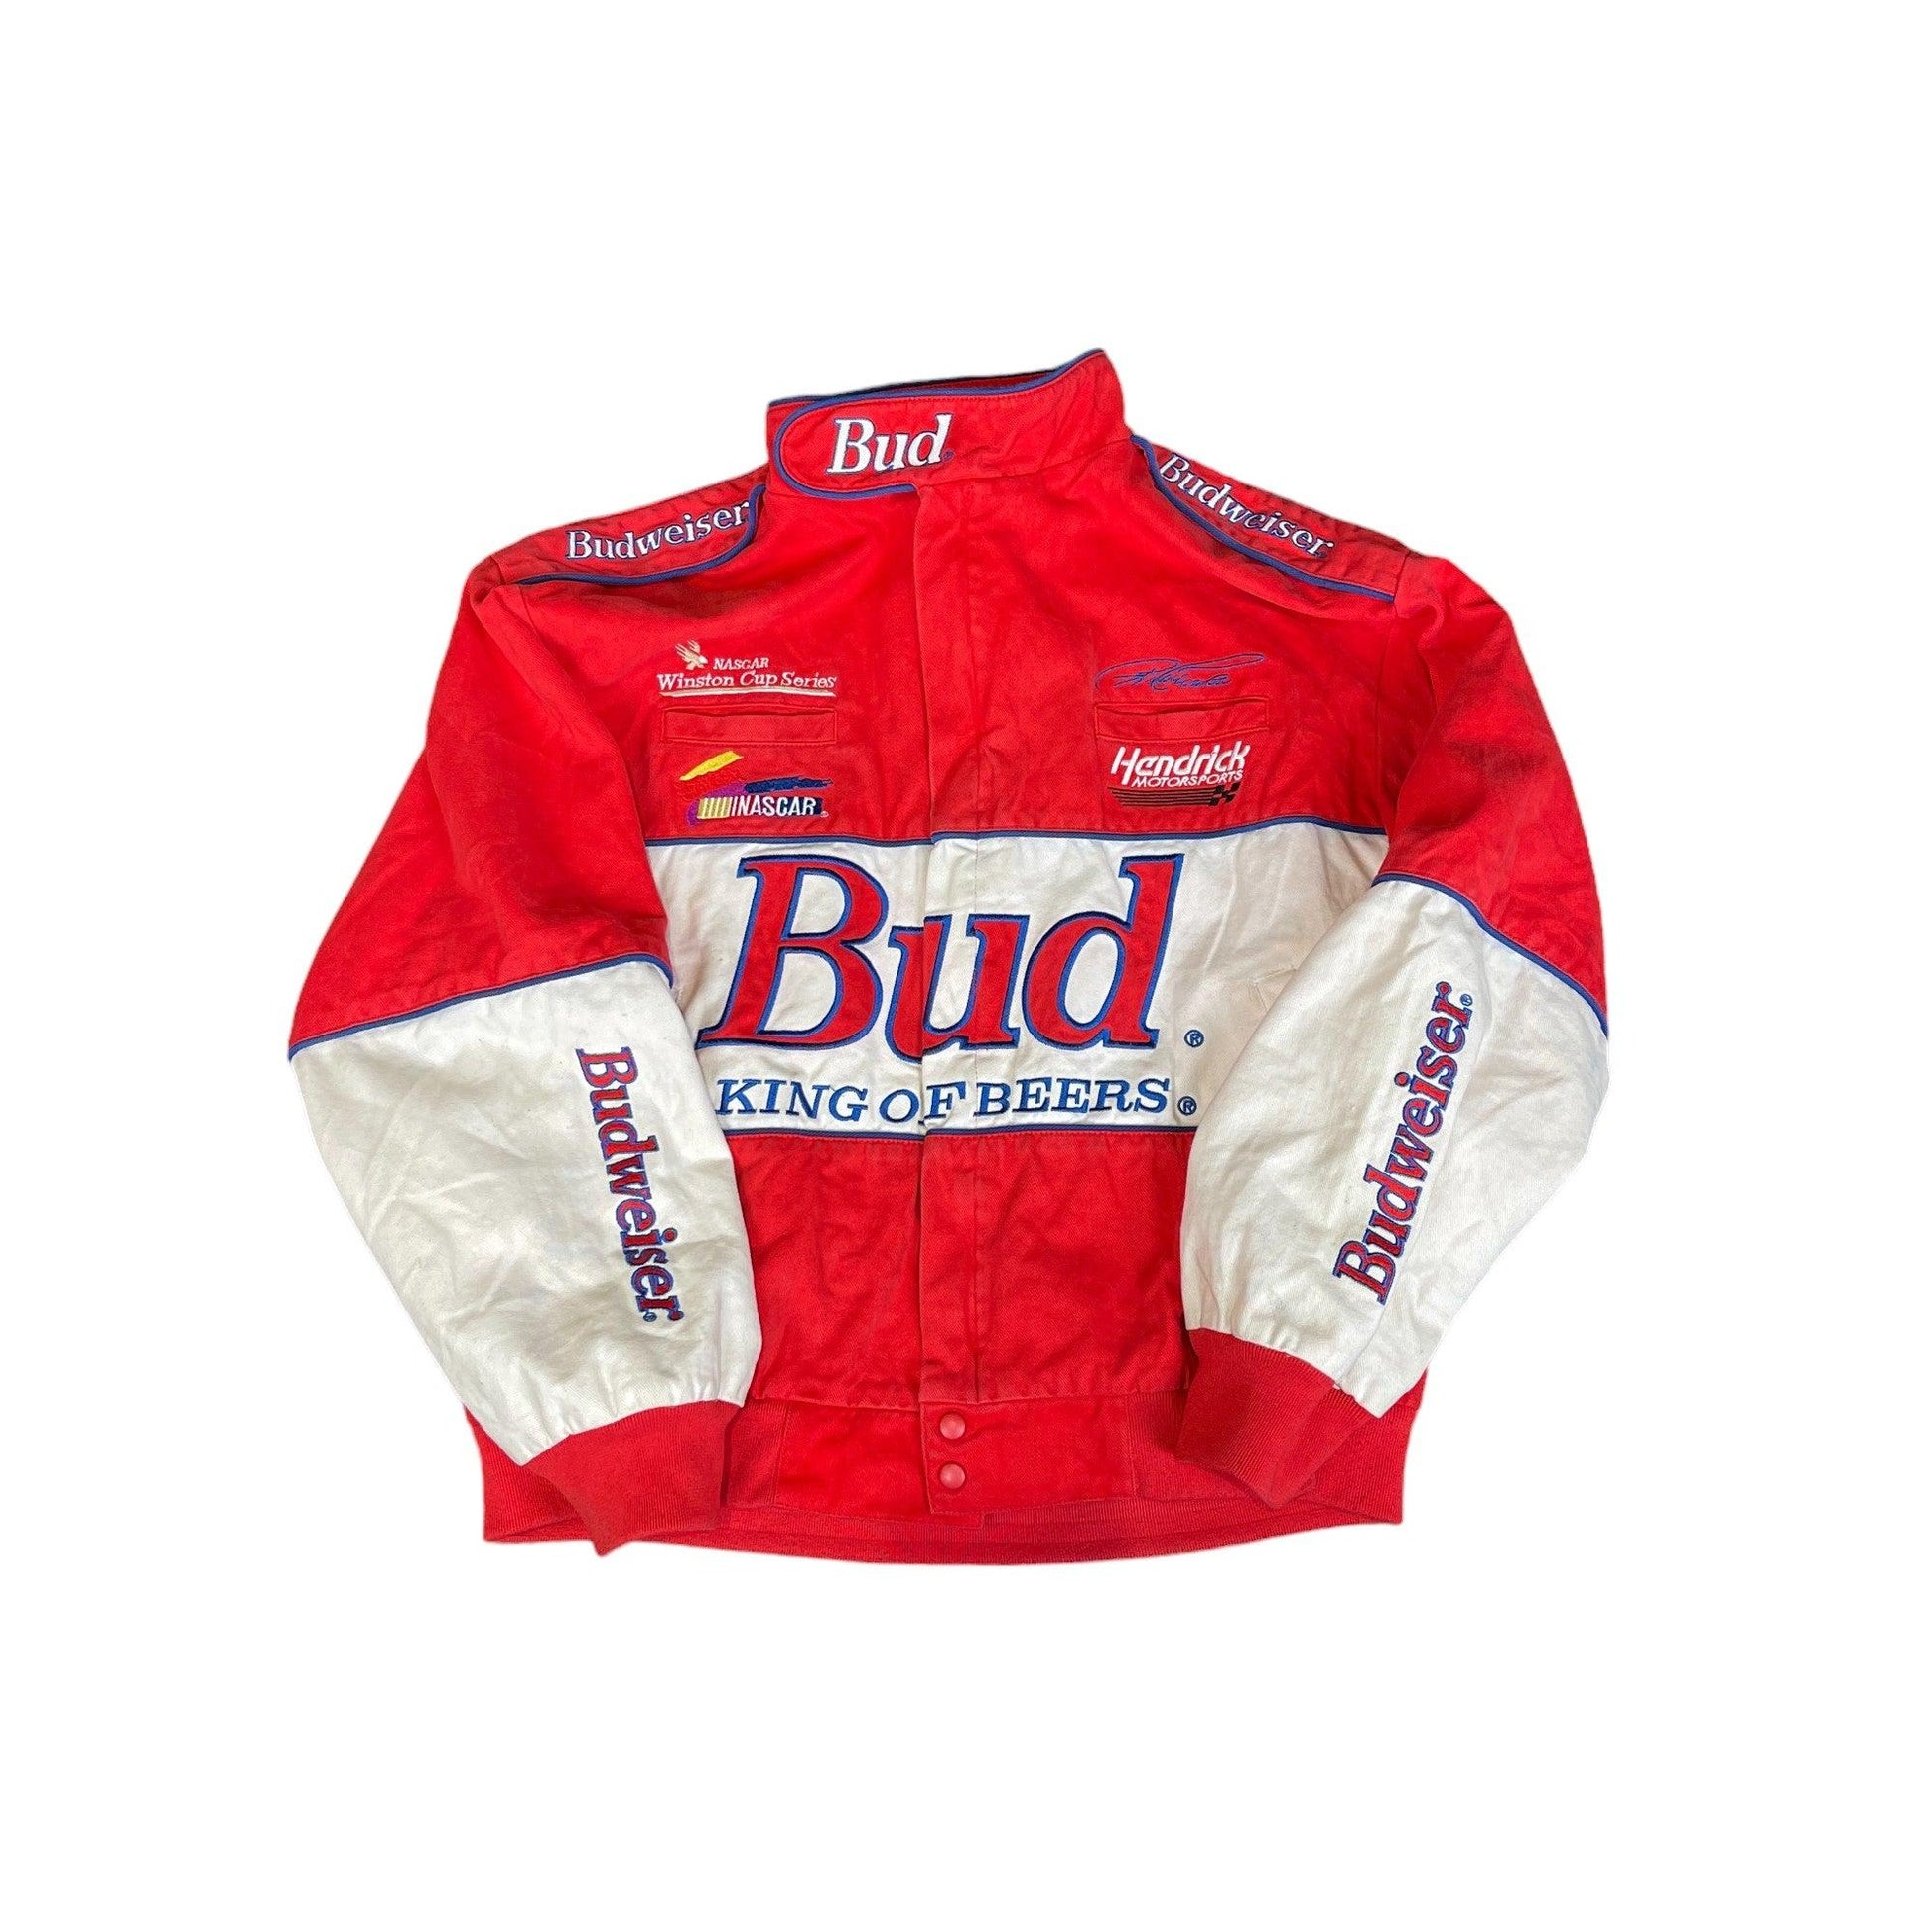 Vintage 90s Red + White Budweiser Racing Jacket - Extra Large - The Streetwear Studio